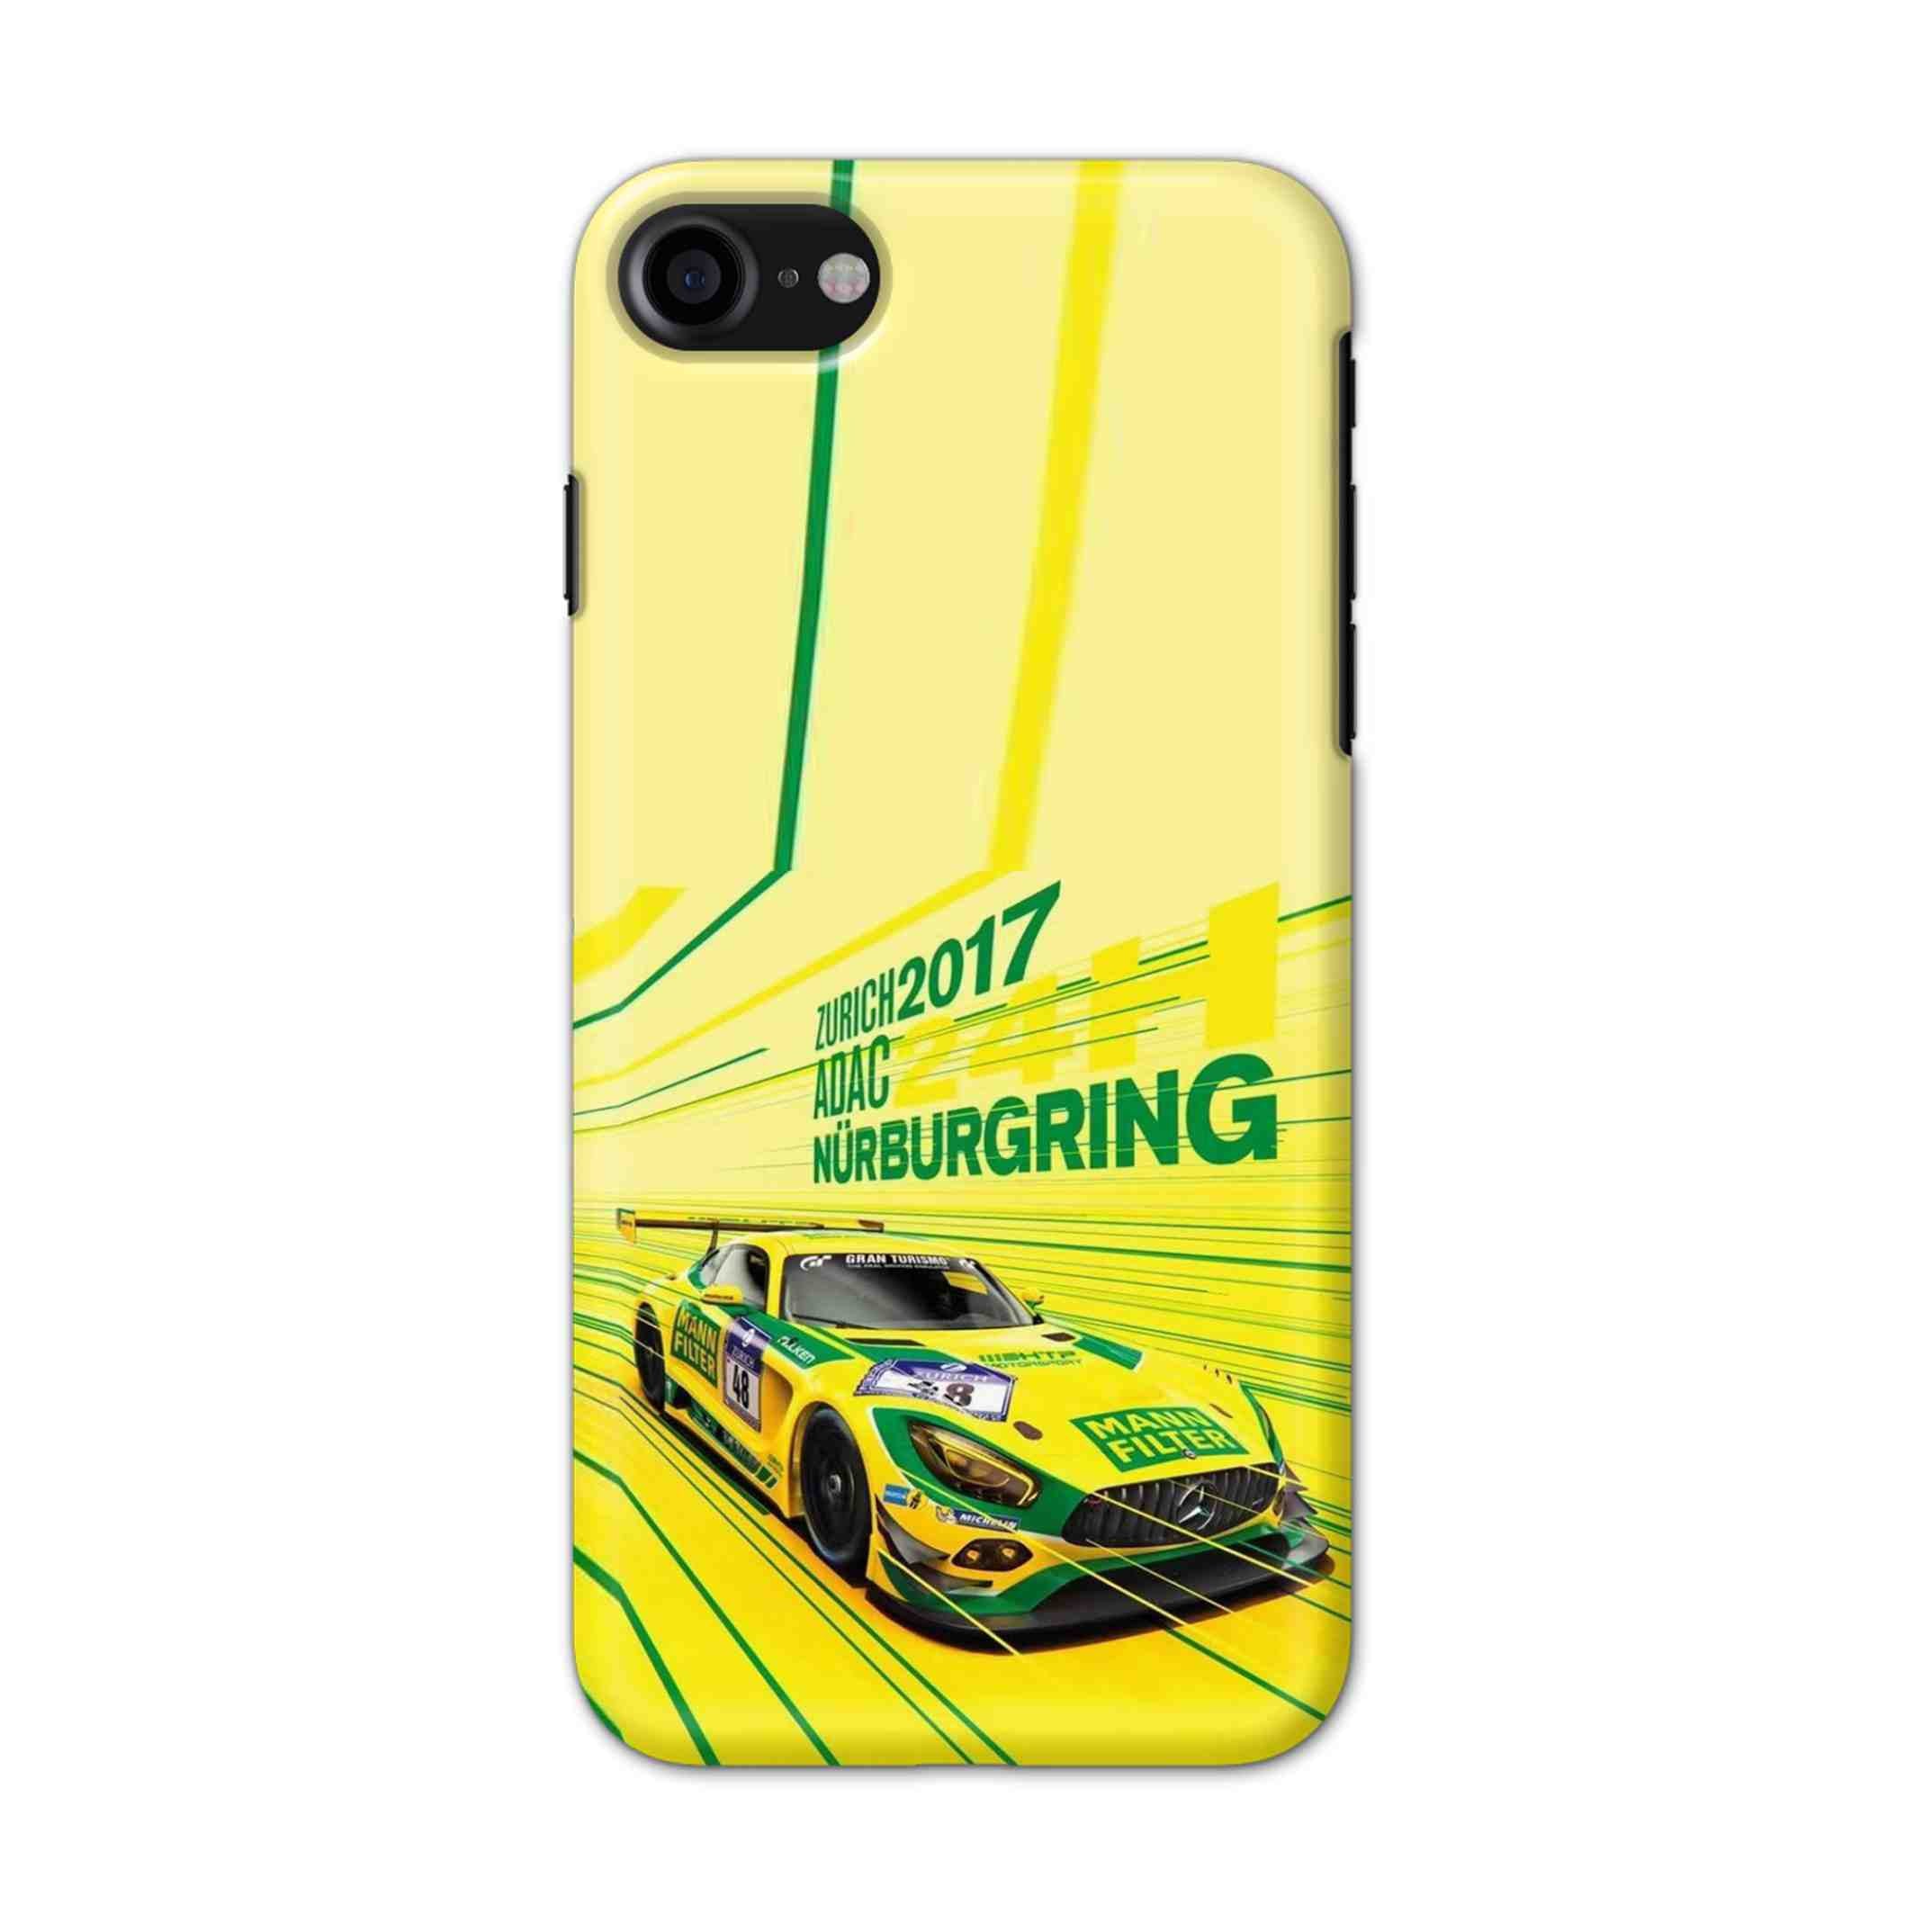 Buy Drift Racing Hard Back Mobile Phone Case/Cover For iPhone 7 / 8 Online